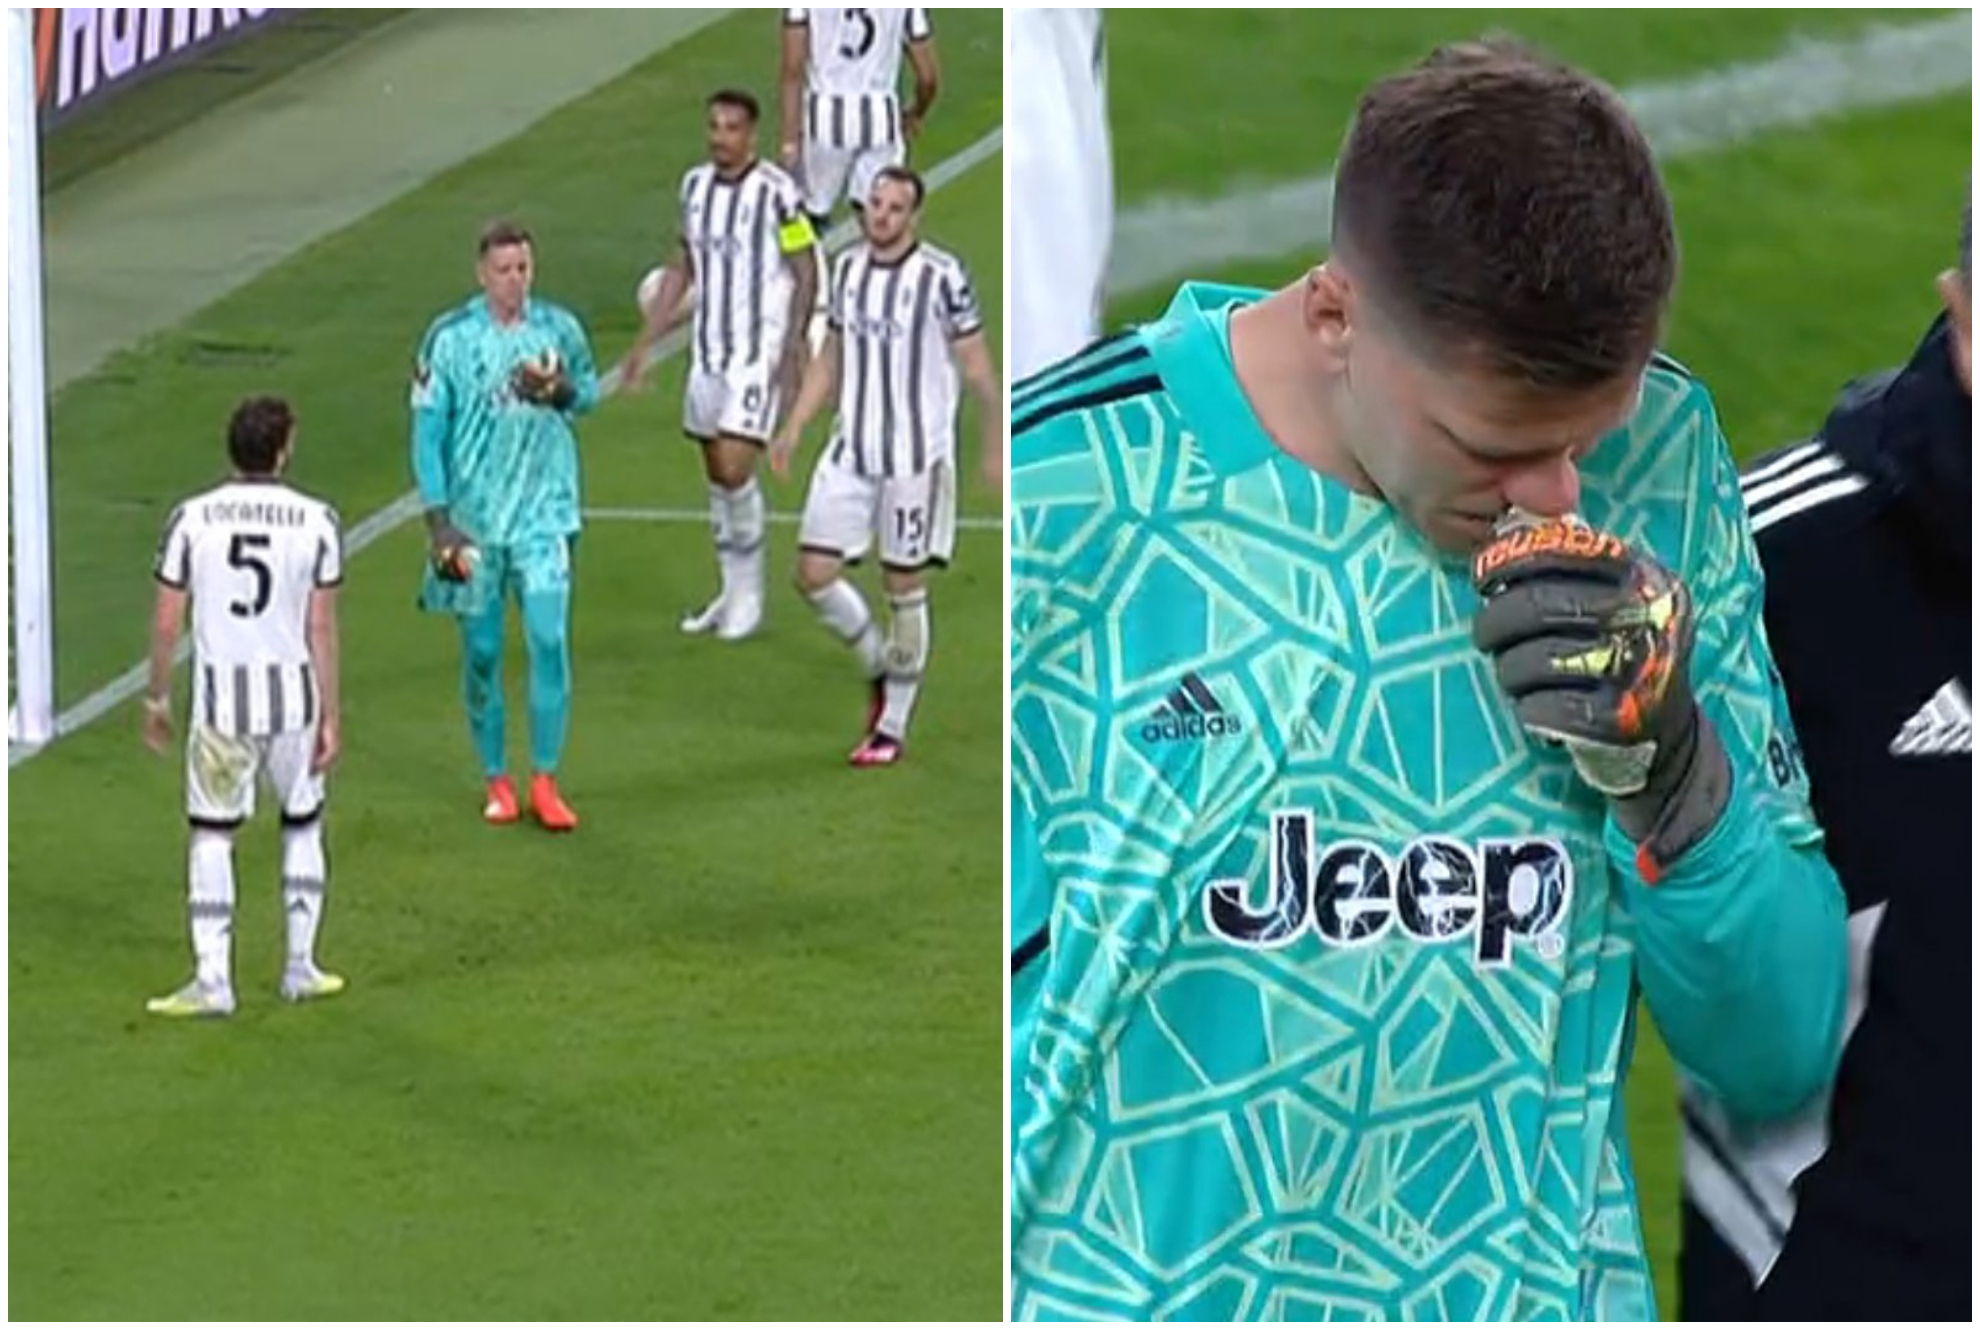 Szczesny leaves the field after experiencing chest pain in the middle of the game